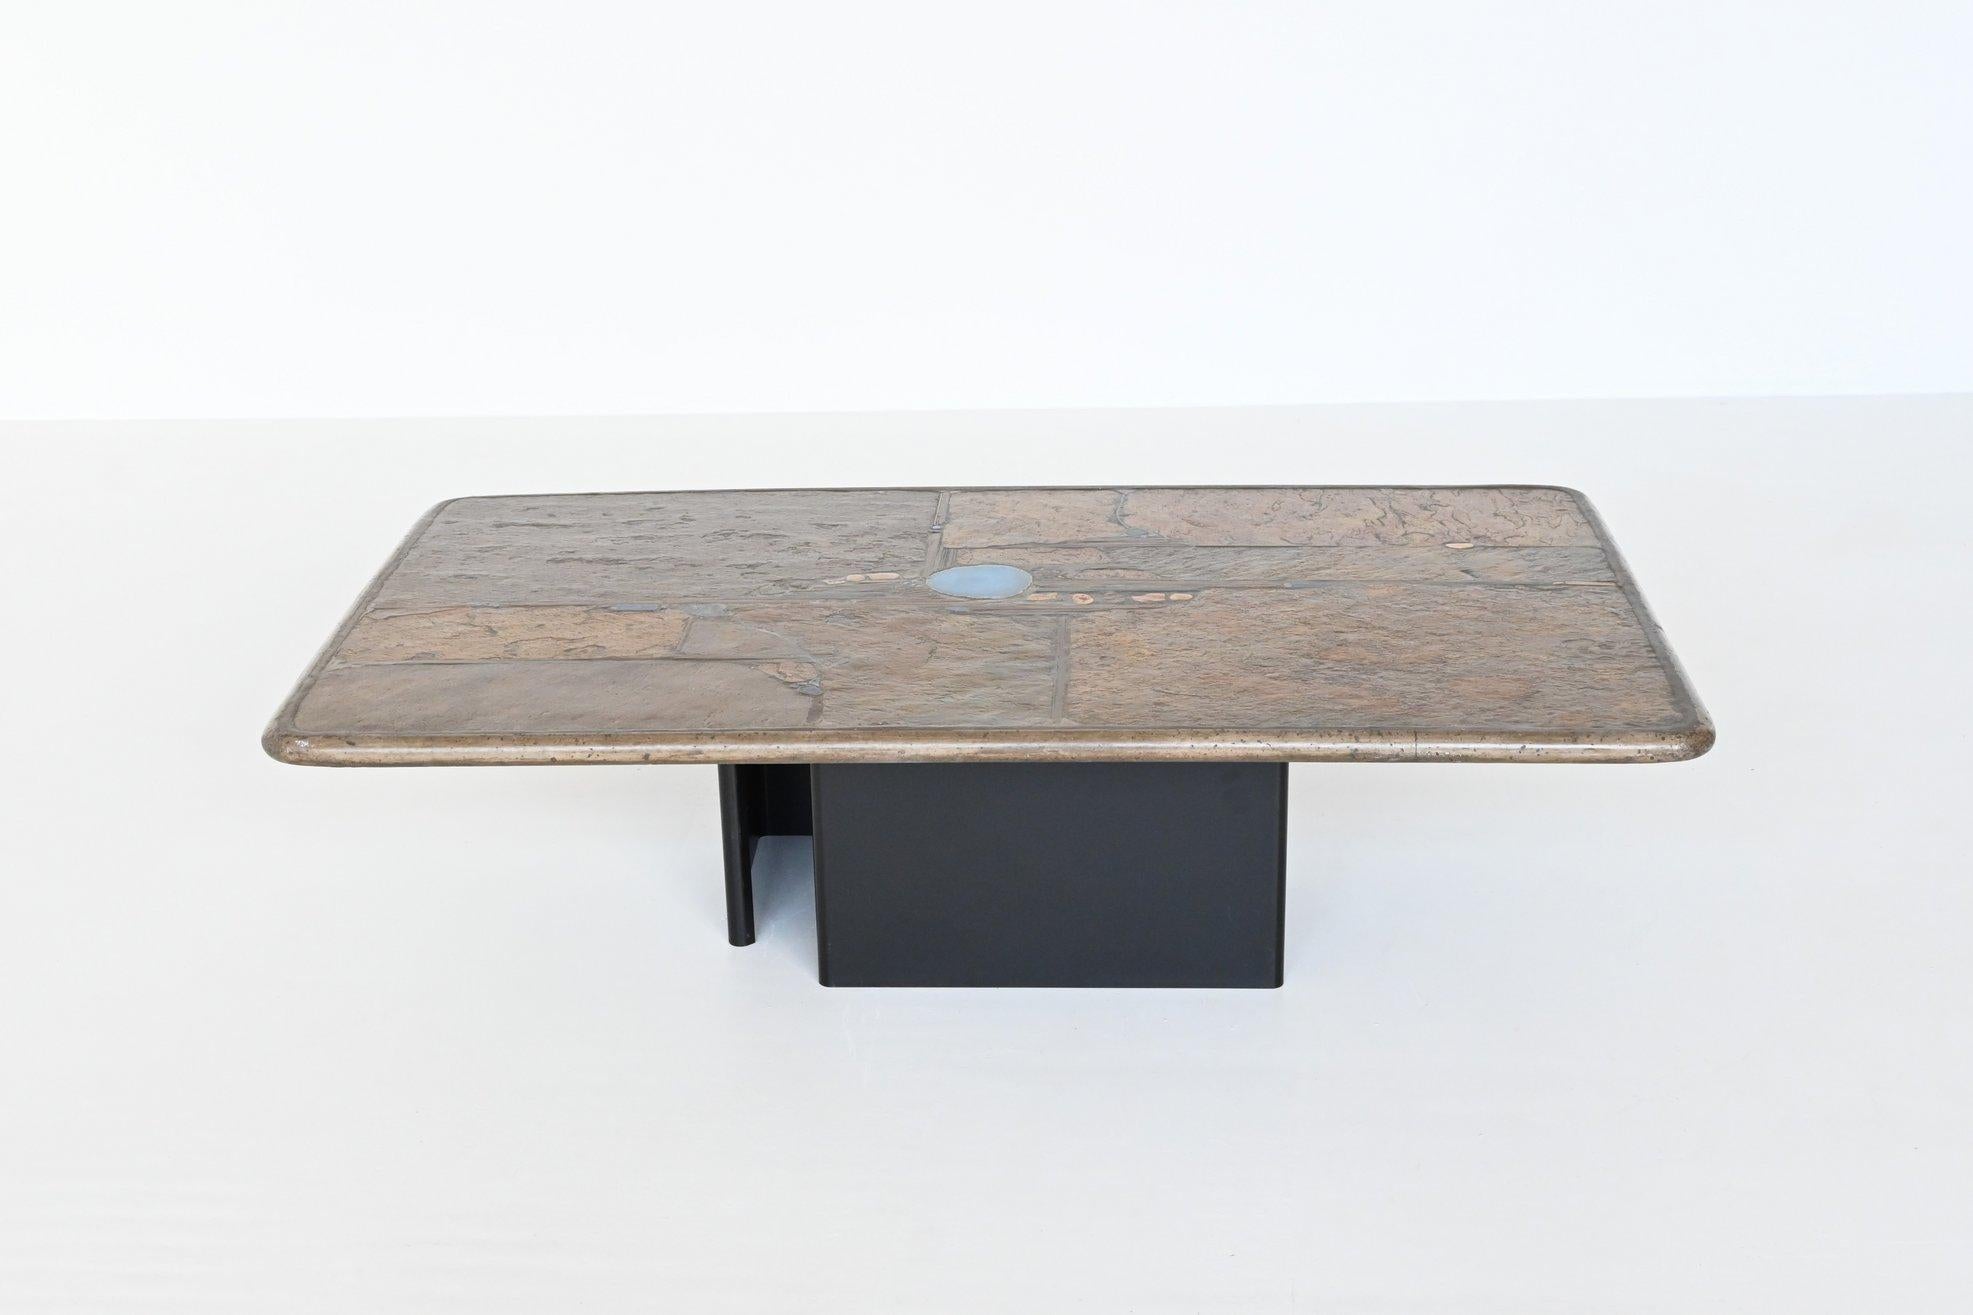 Beautiful rectangle shaped coffee table designed and made by Paul Kingma, The Netherlands 1995. The brown colored heavy and thick concrete top rests on two metal bases that are black lacquered. Beautiful composition of agate, slate, stones, copper